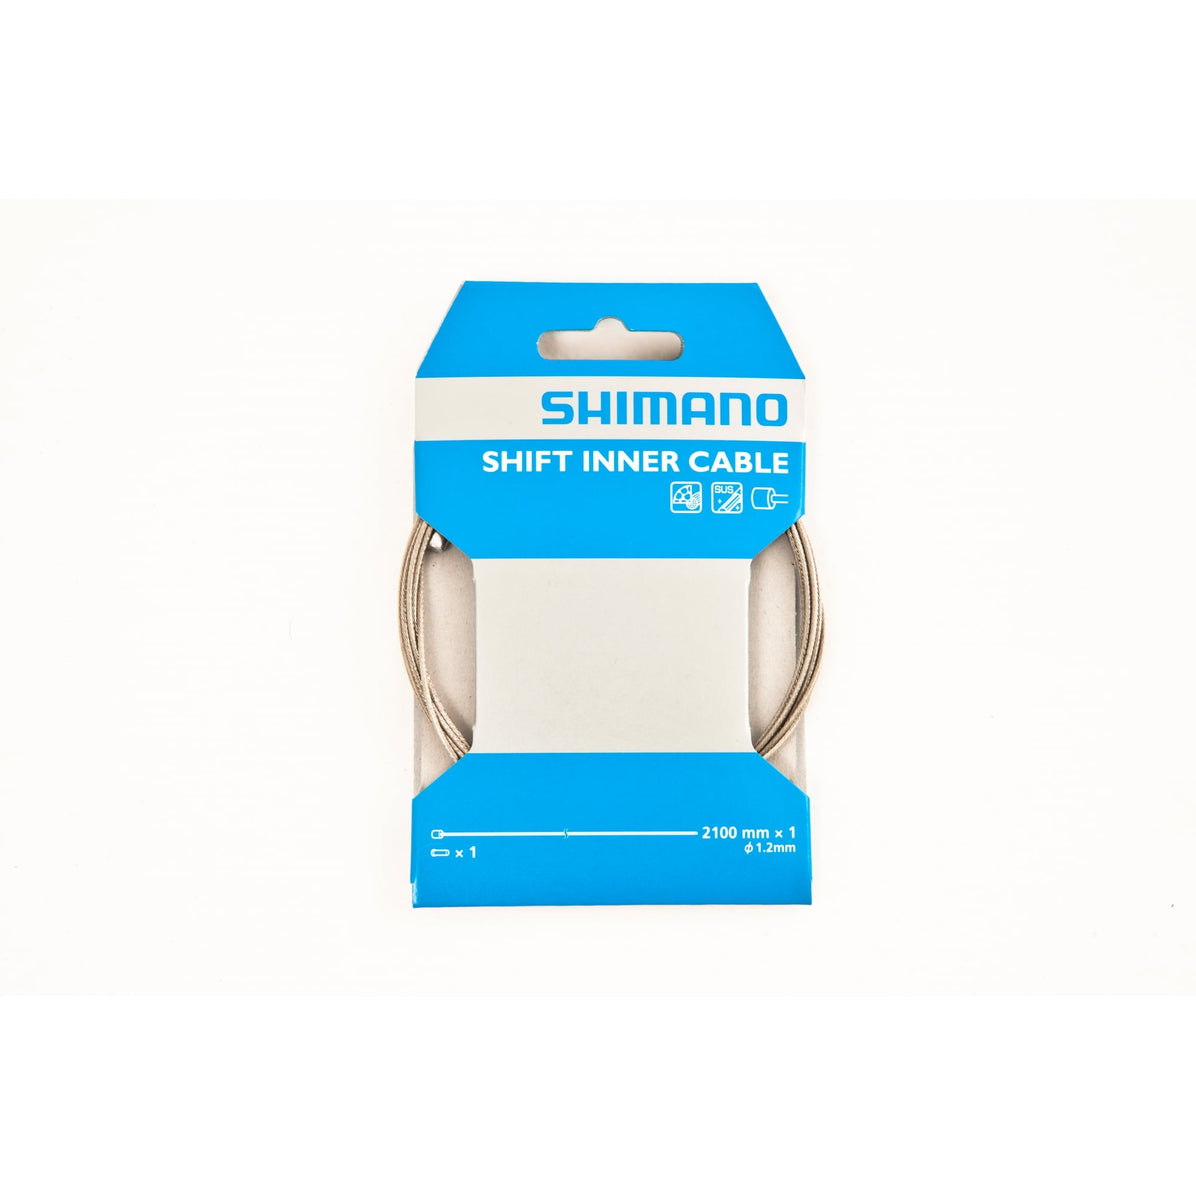 Shimano Spares Road / MTB Stainless Steel Gear Inner Wire, 1.2 x 2100, Single